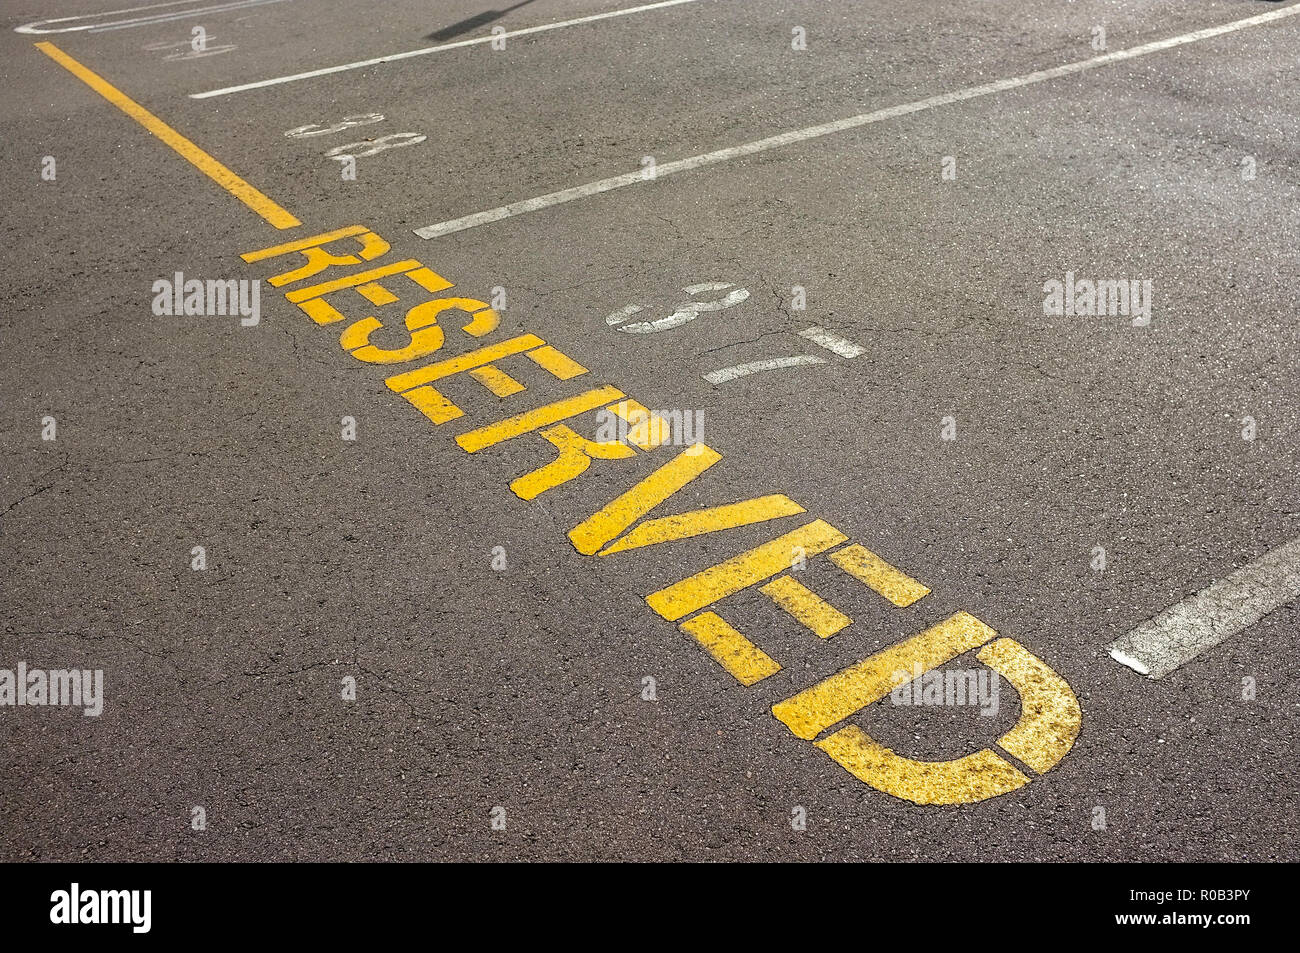 Reserved marking for reserved parking spots. Stock Photo